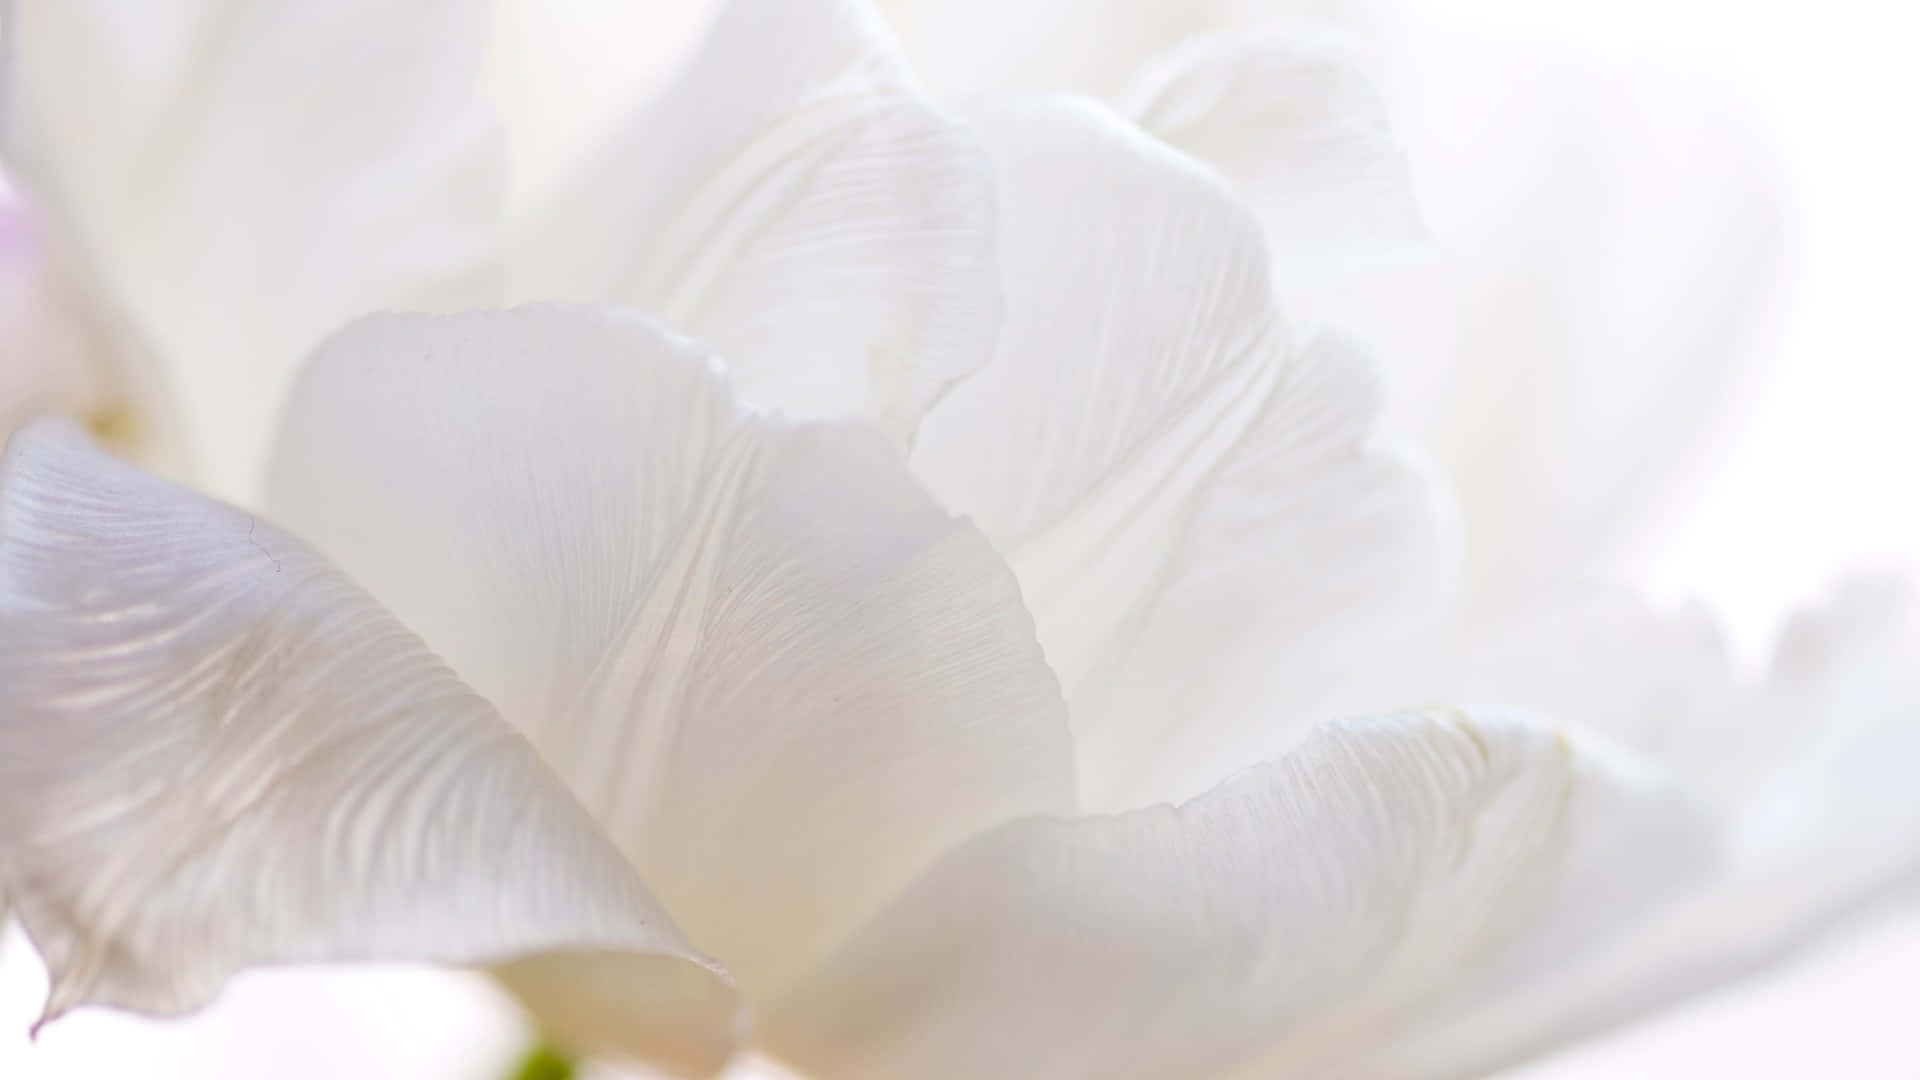 White Flower Petal Close Up Picture